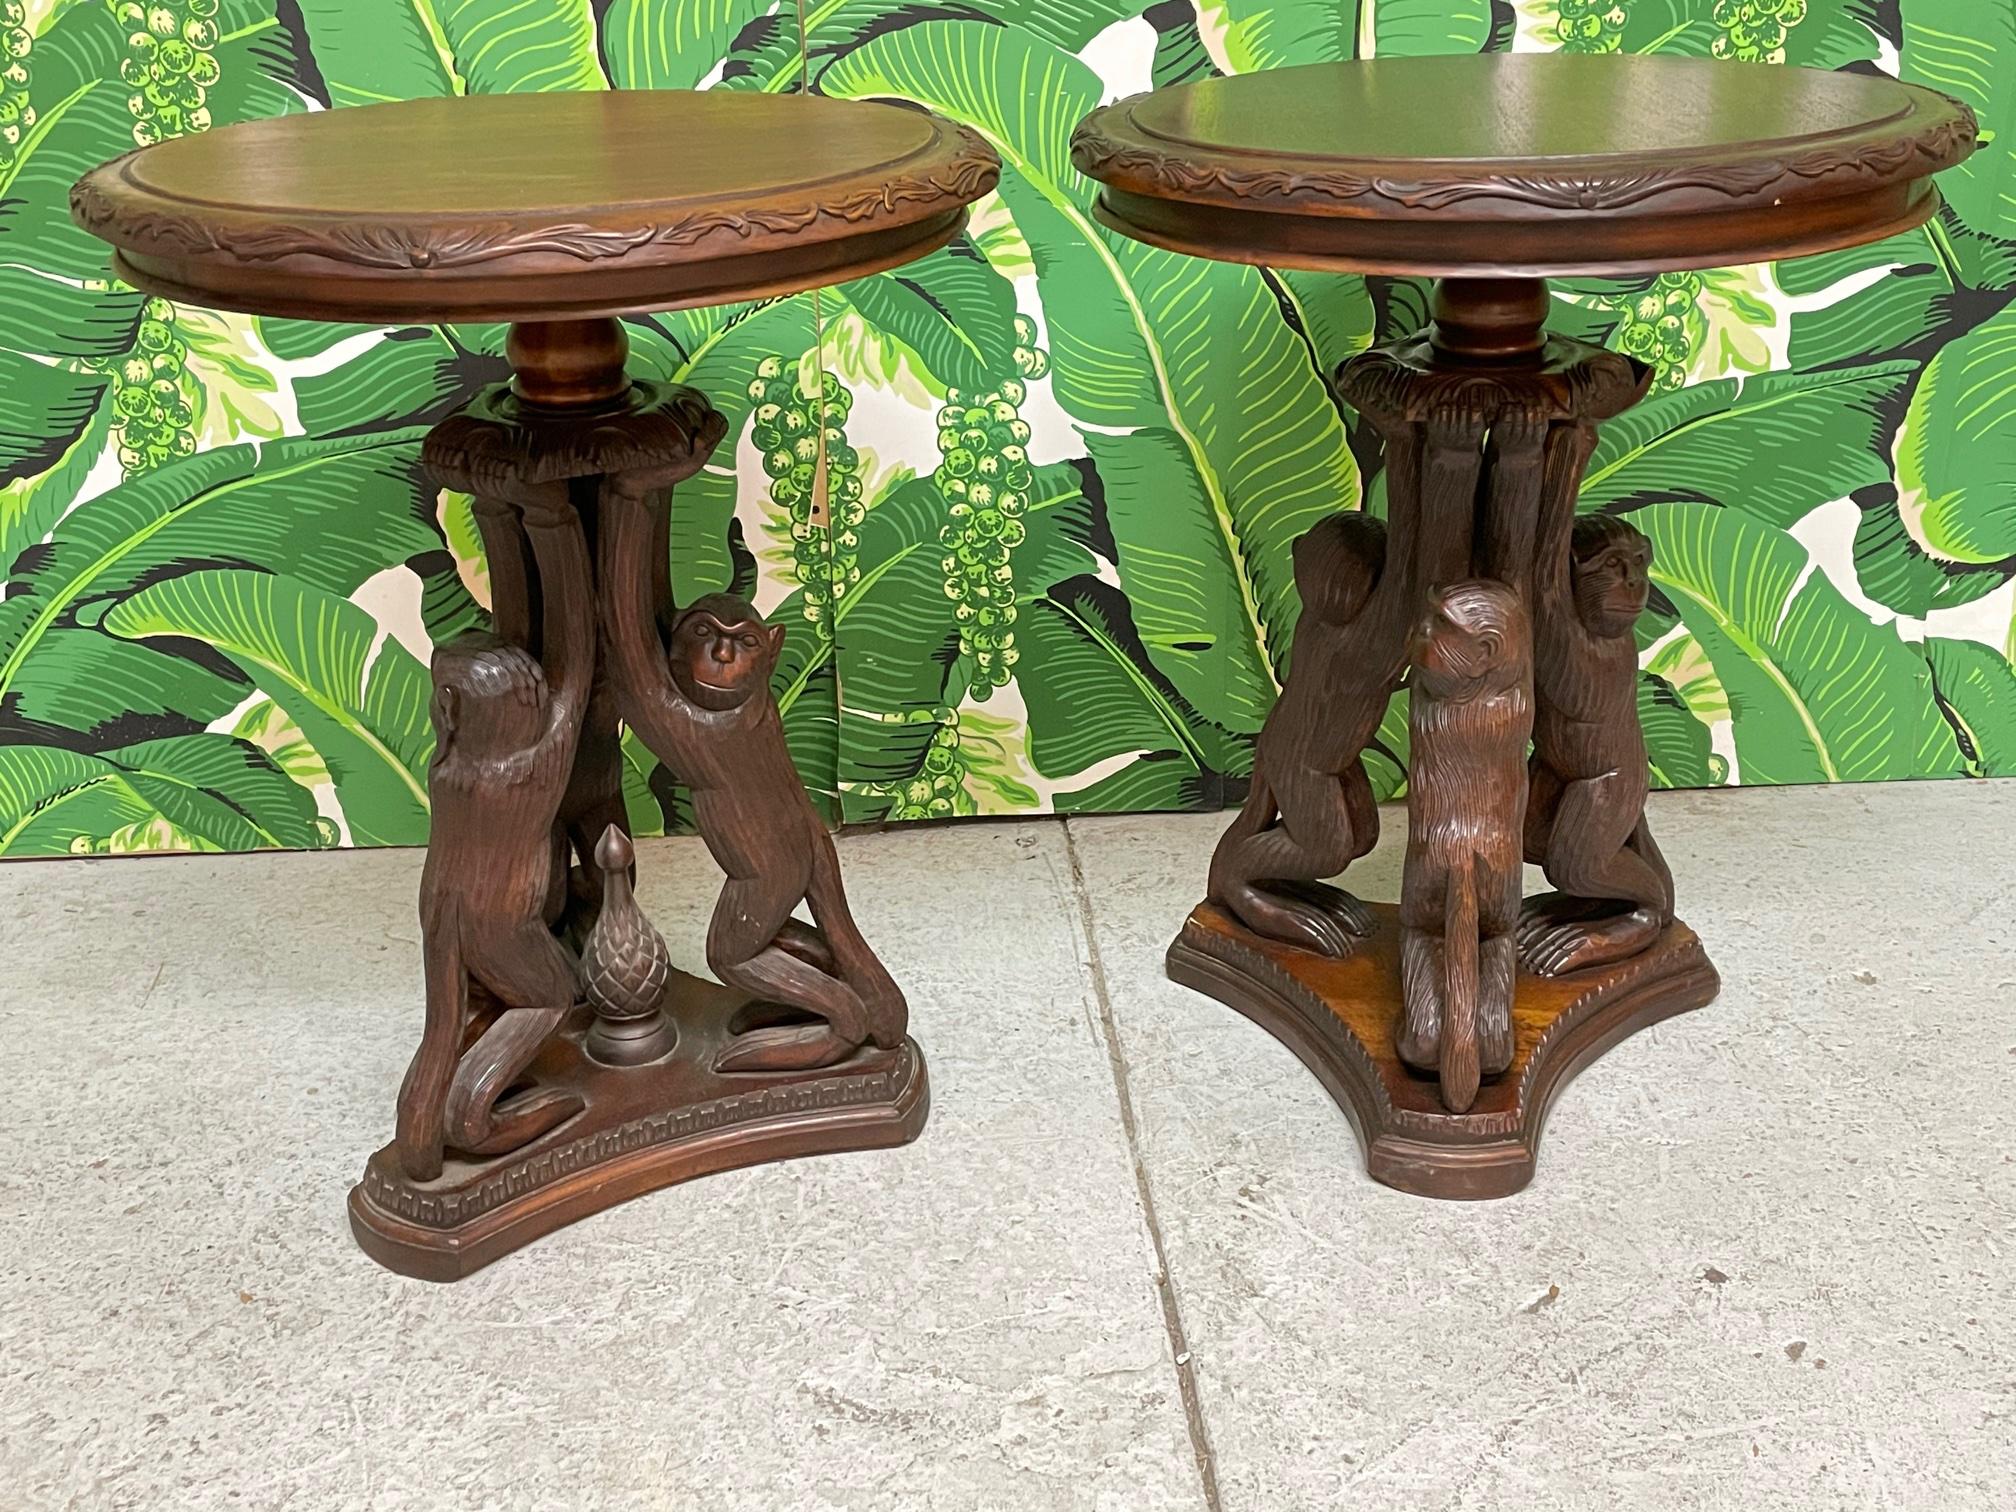 Pair of vintage side tables feature a fun motif of sculptural hand carved monkeys. Good vintage condition with minor imperfections consistent with age. One monkey's hand has a chip. 

 
 